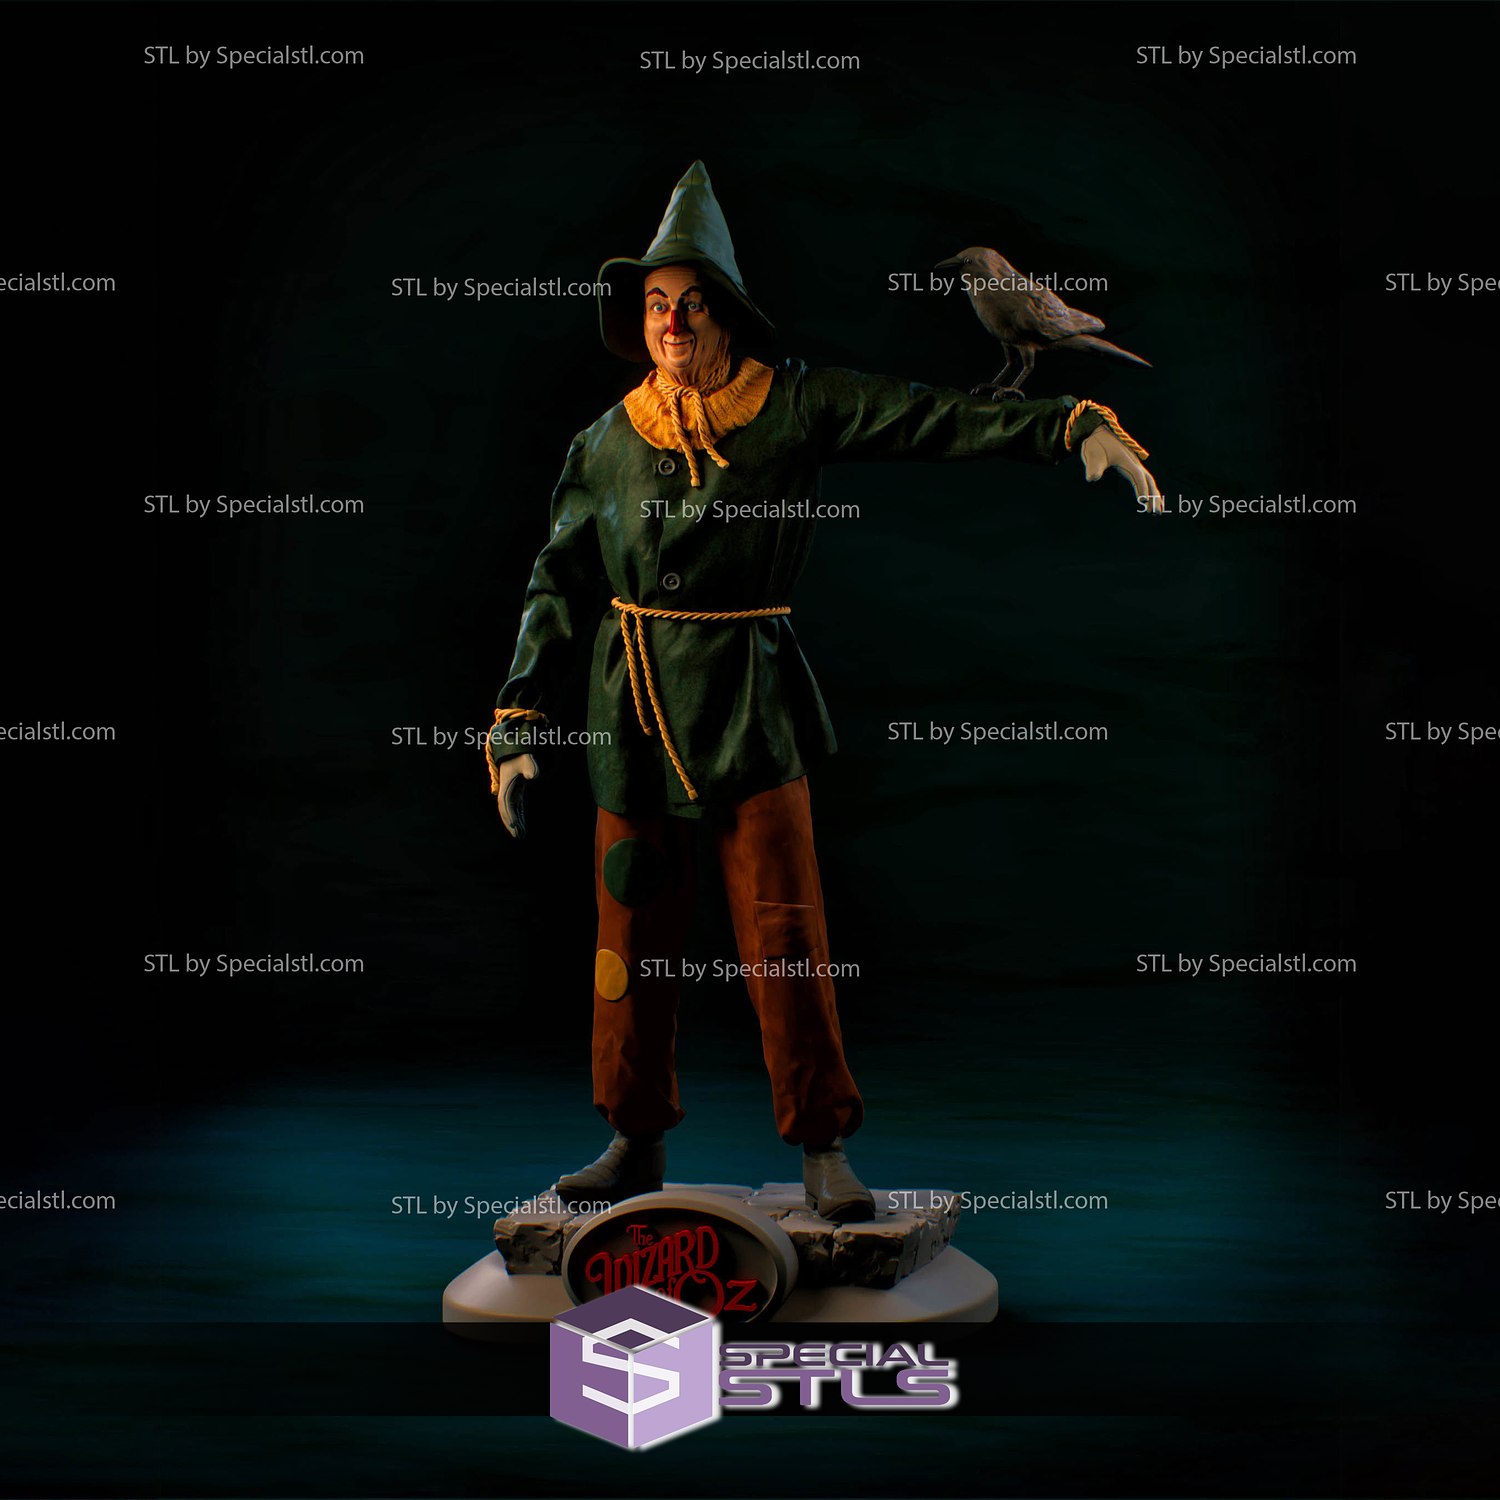 Toto Scarecrow 3D Printing Model The Wizard of Oz STL Files